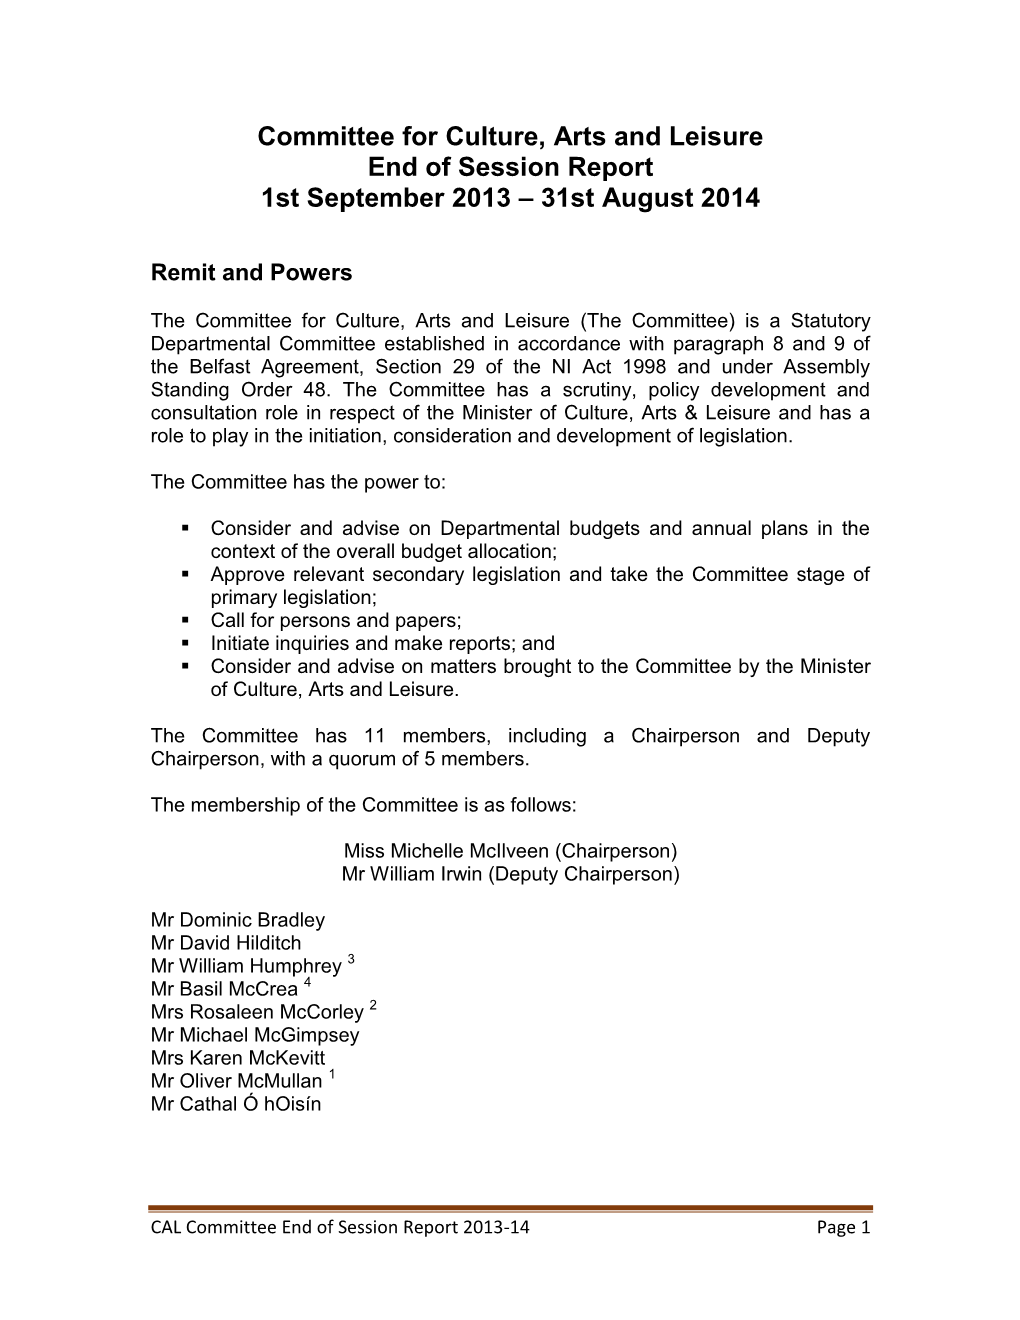 Committee for Culture, Arts and Leisure End of Session Report 1St September 2013 – 31St August 2014